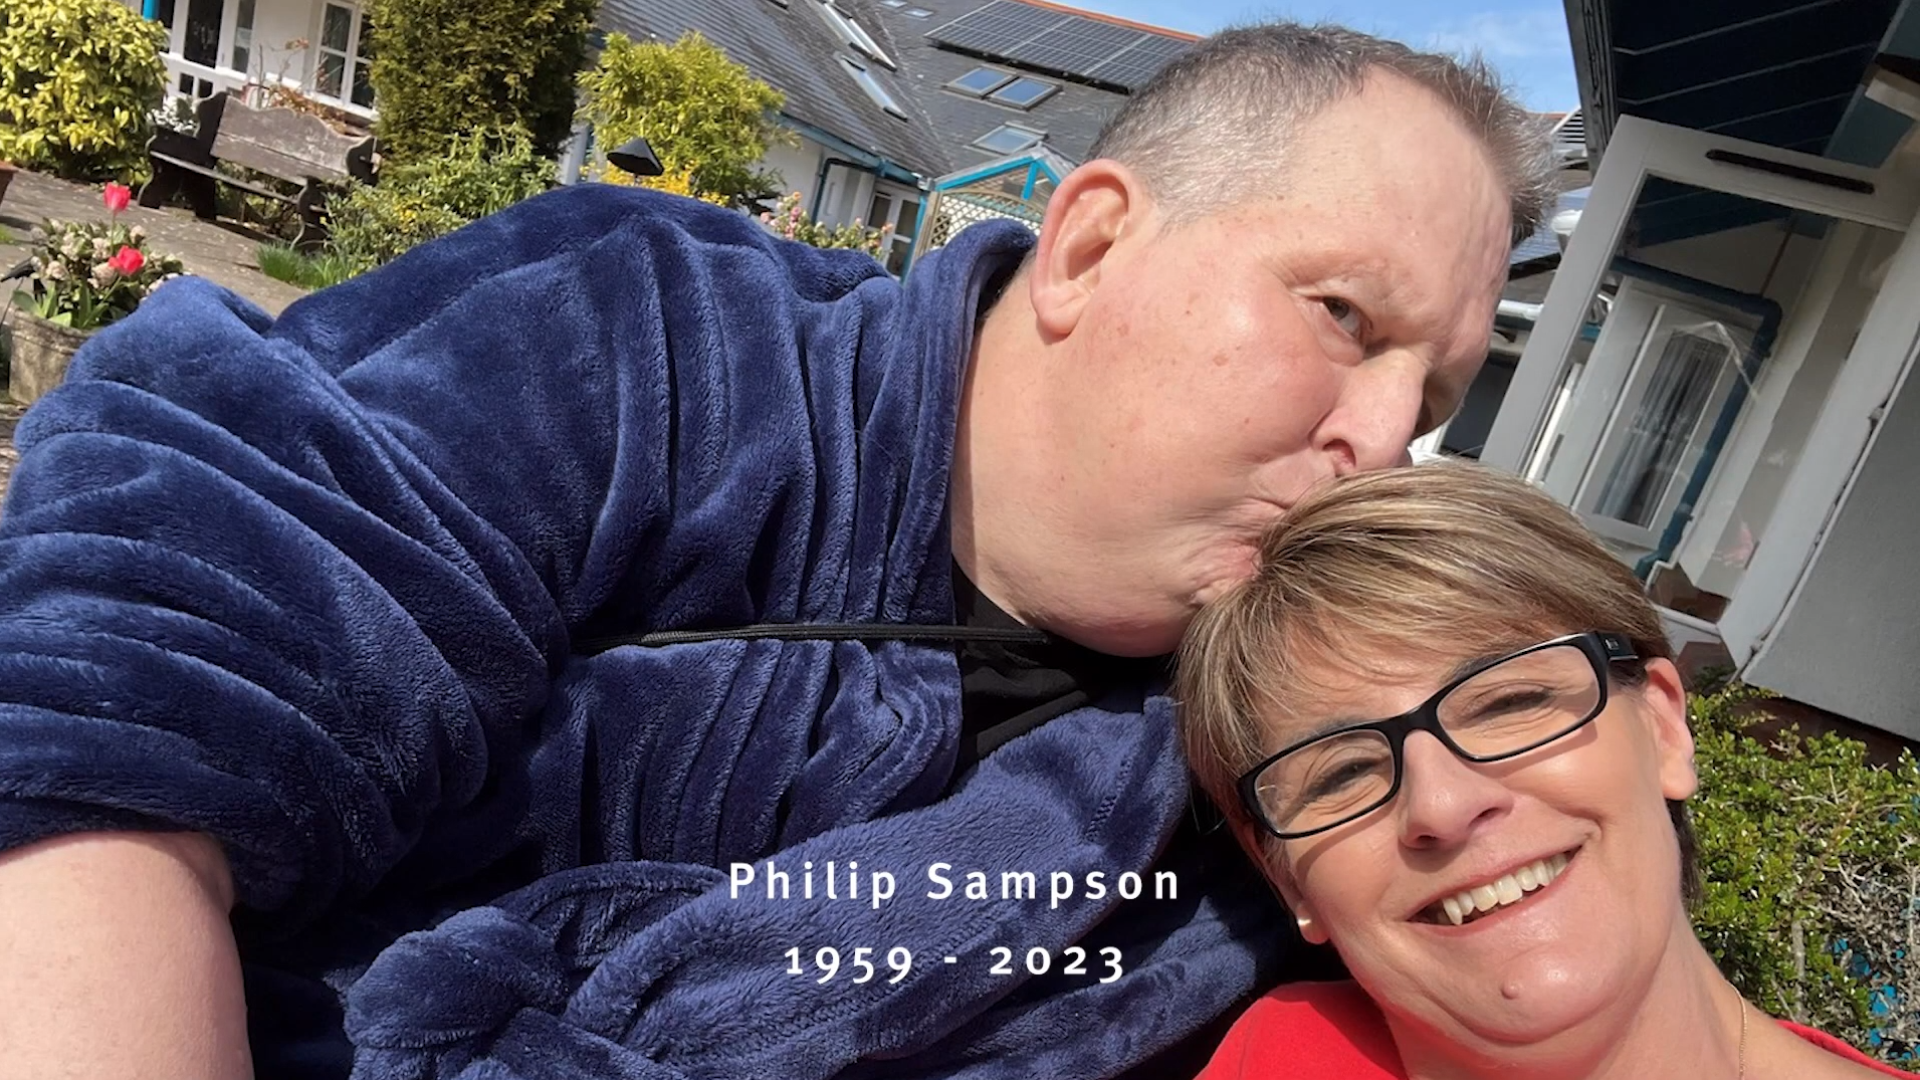 Phil’s story: Hospiscare is a place to live your life